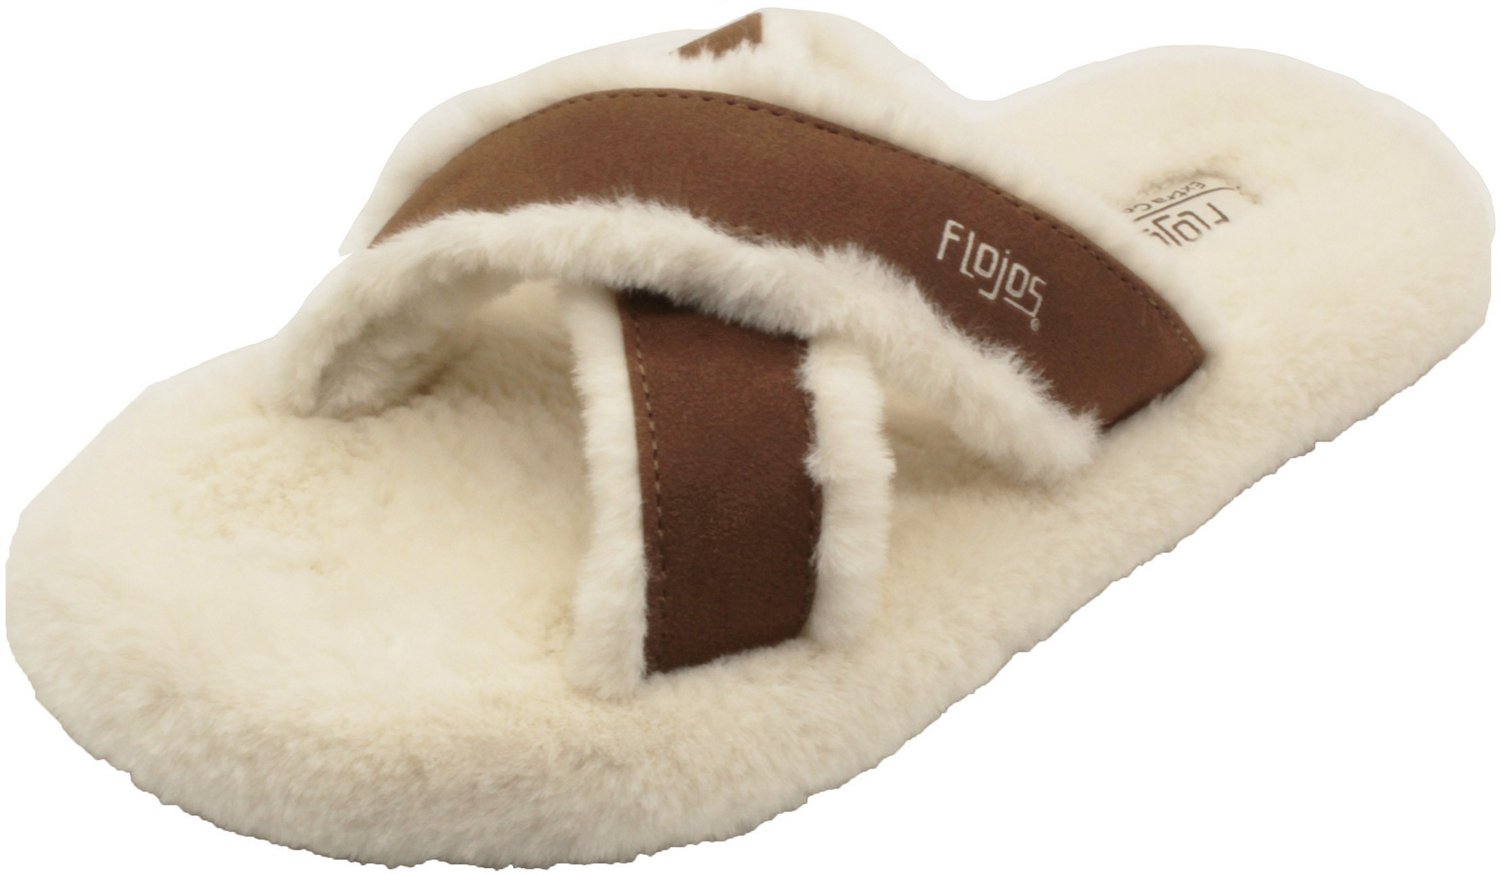 NWT WOMEN'S CRISS CROSS FLUFFY SLIPPERS! PRICE FIRM!